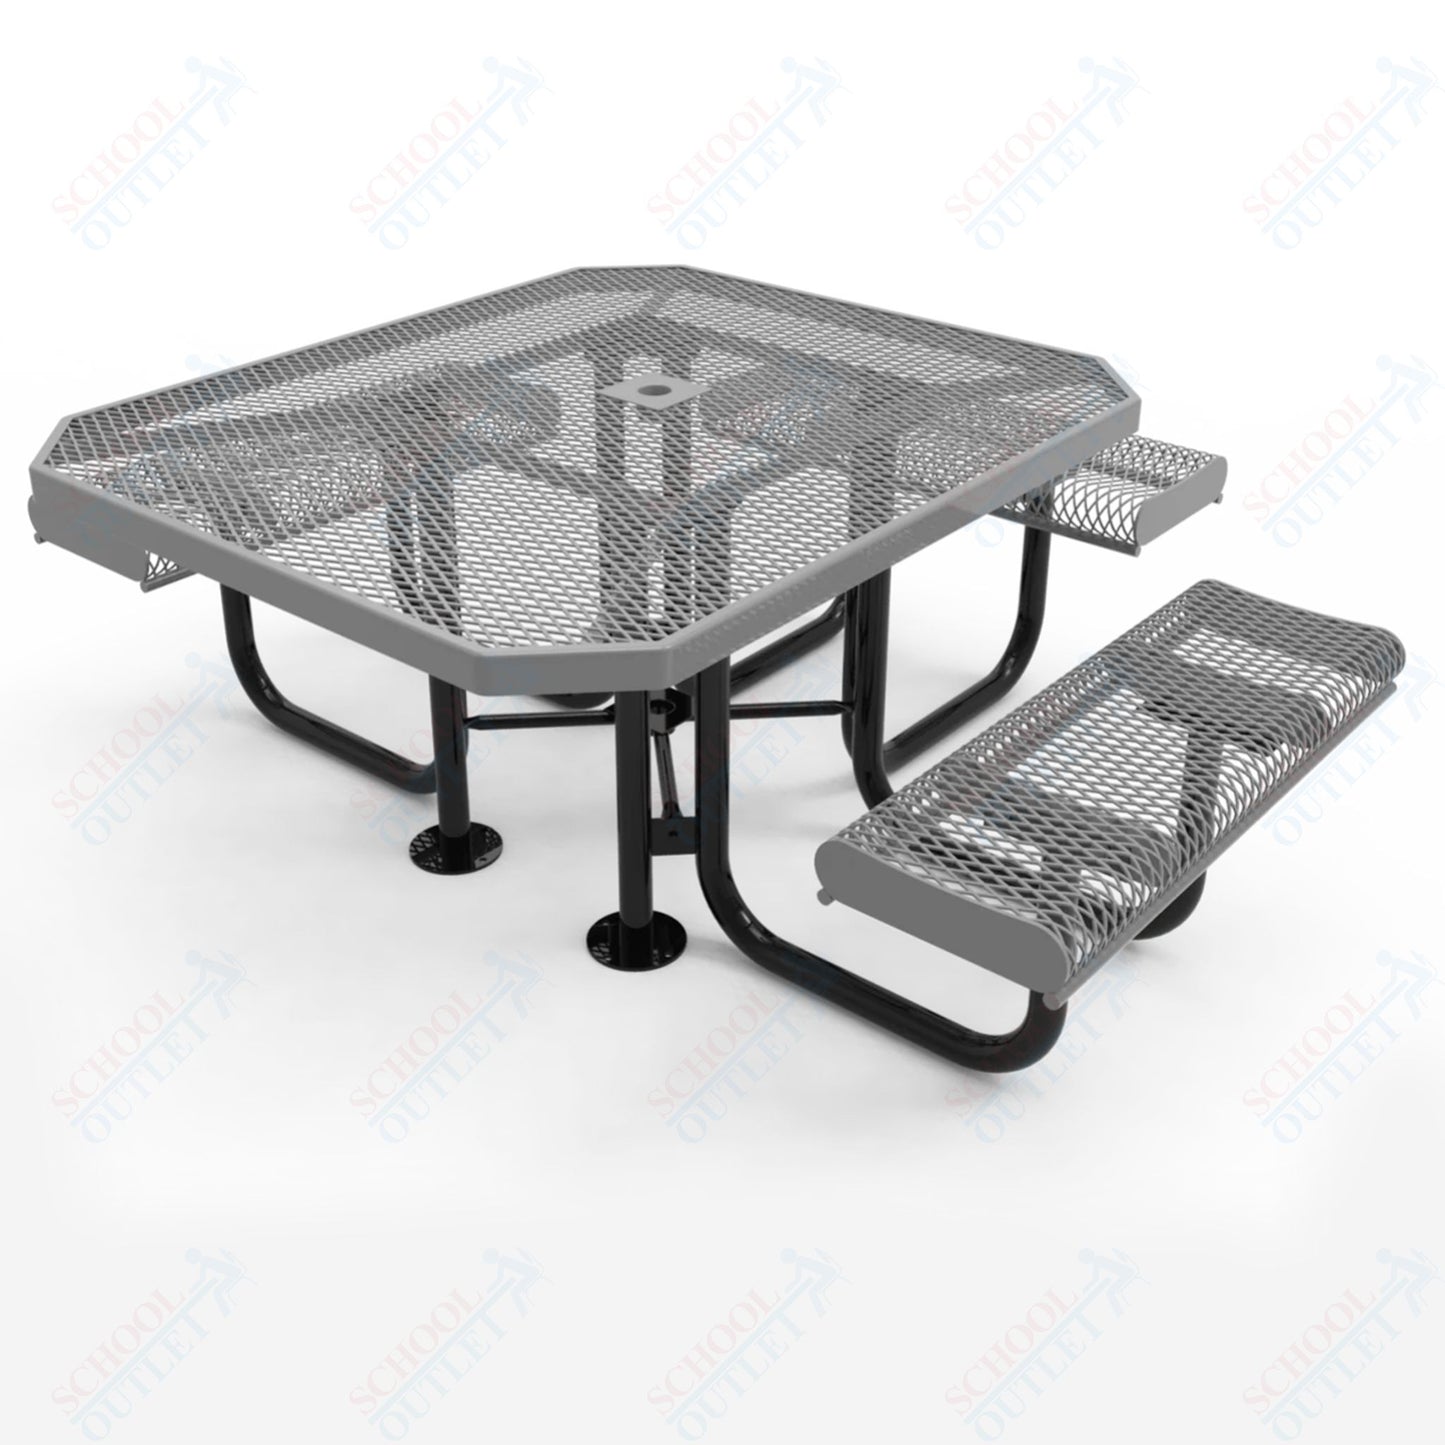 MyTcoat MYT-TOR46 46″ Octagon Portable Picnic Table with Rolled Edges, 3 Seat and ADA Accessible (80"W x 71"D x 30"H)